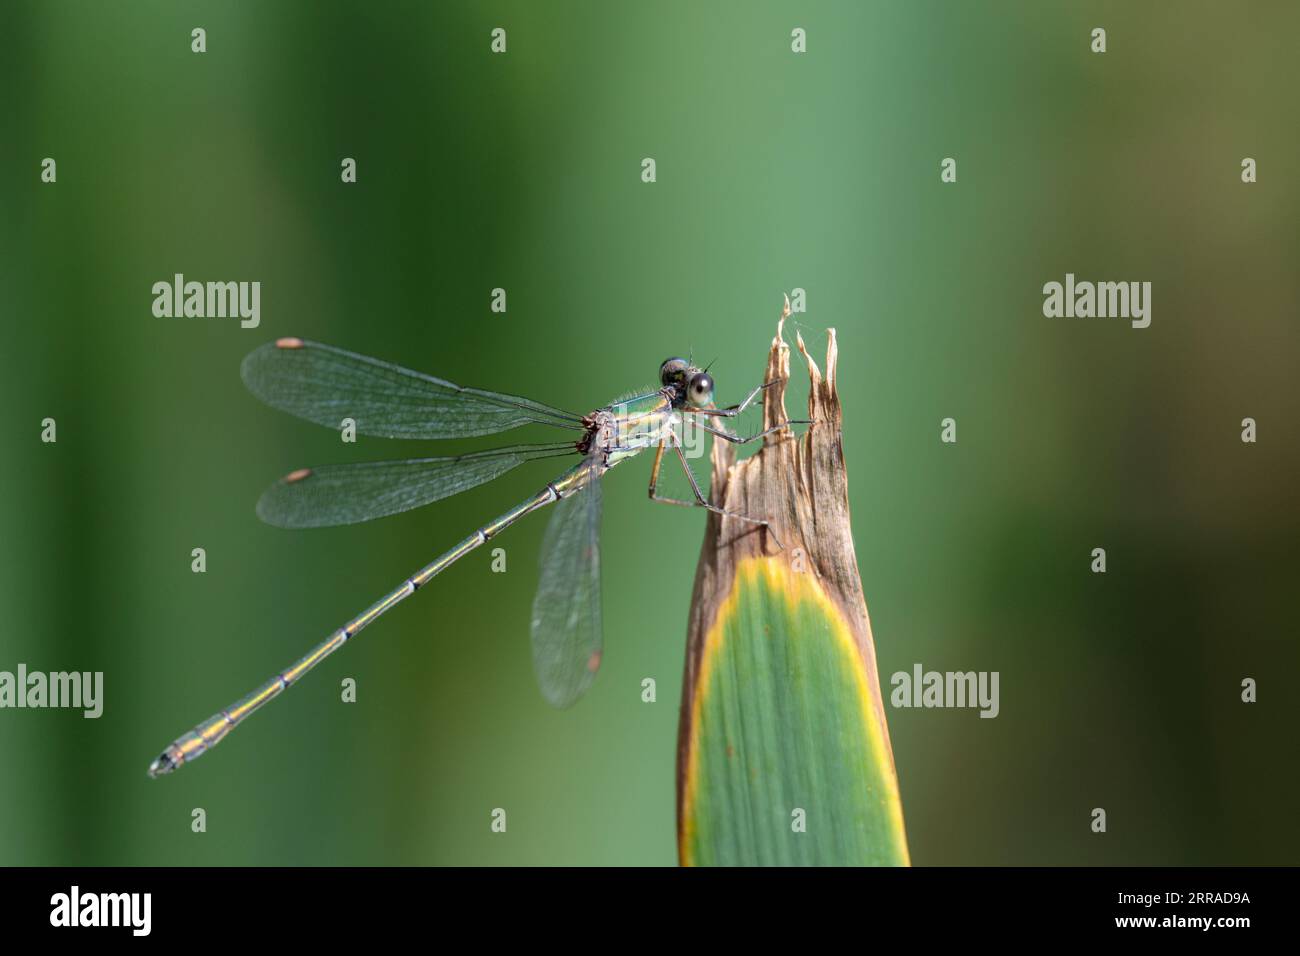 Emerald damselfly Lestes sponsa, metalic green and brown body brown wing spots blue and brown eyes perched on pond vegetation copy space Stock Photo